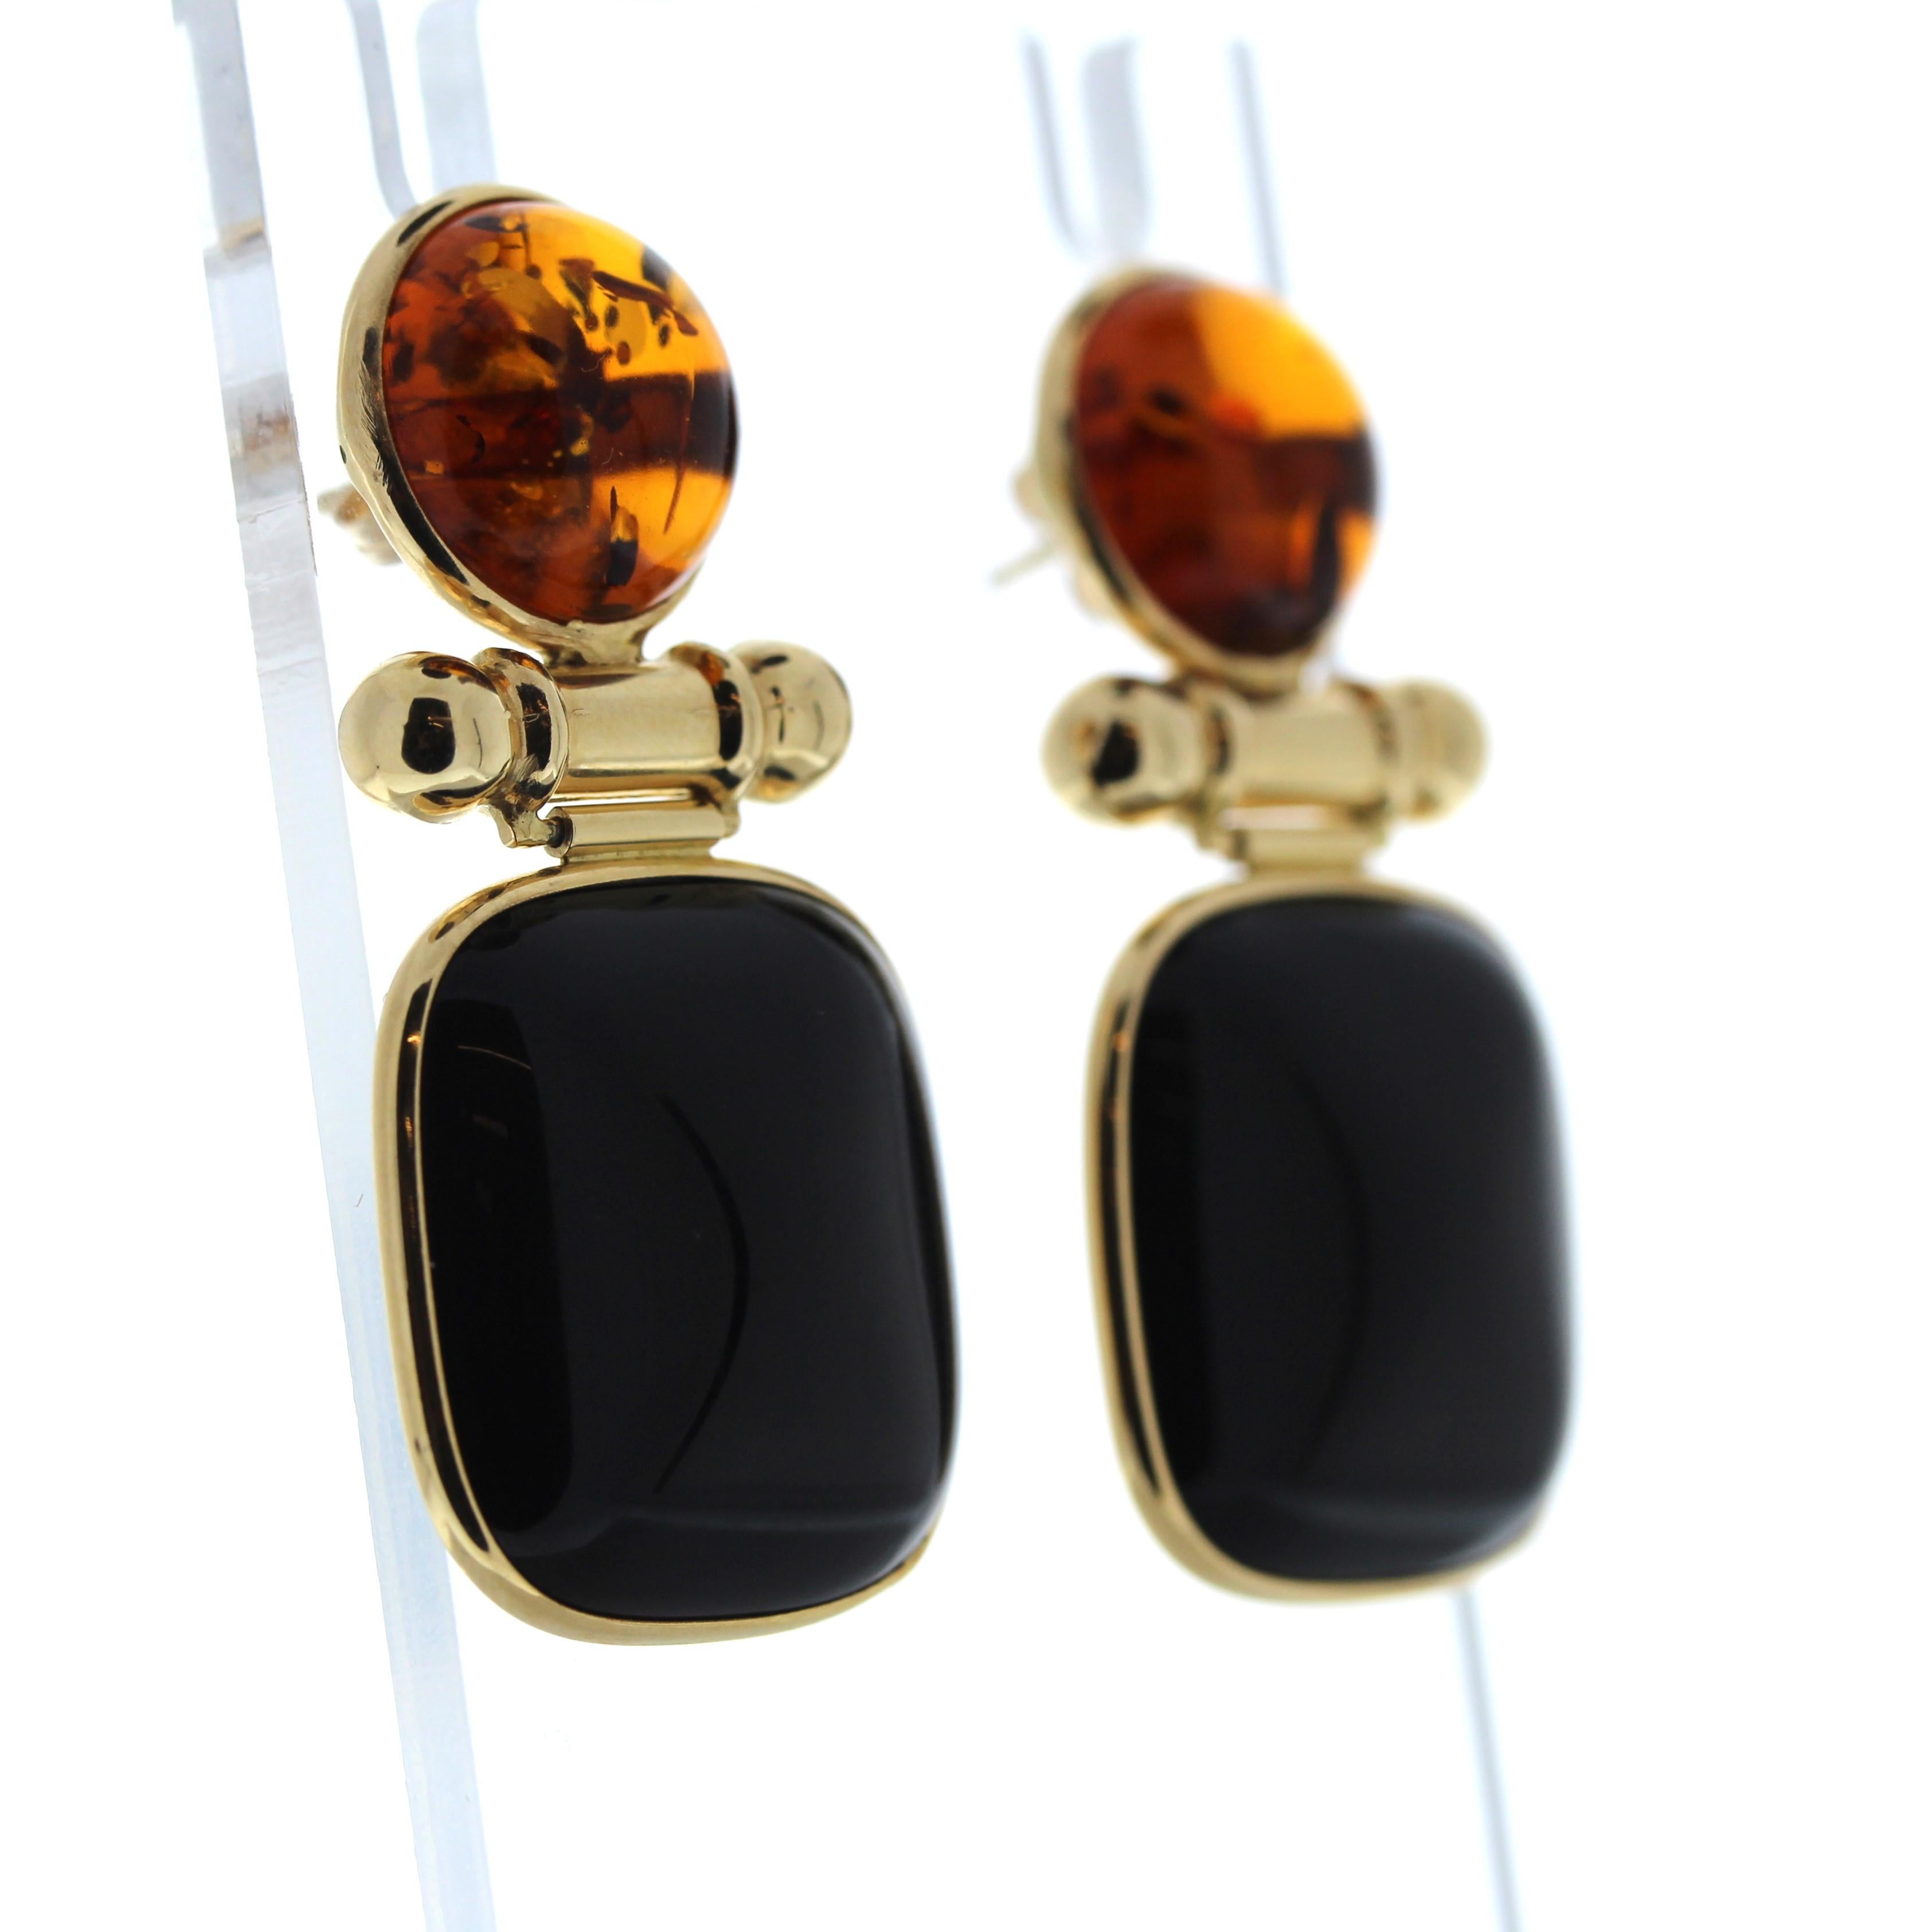 A pair of earrings that each center a round onyx, each measuring approximately 21mm and a round cabochon citrine, each measuring approximately 13mm. Fastened by posts and push backs. 14K Yellow Gold. Approximate Total Gross Weight: 14.08 Grams. 1